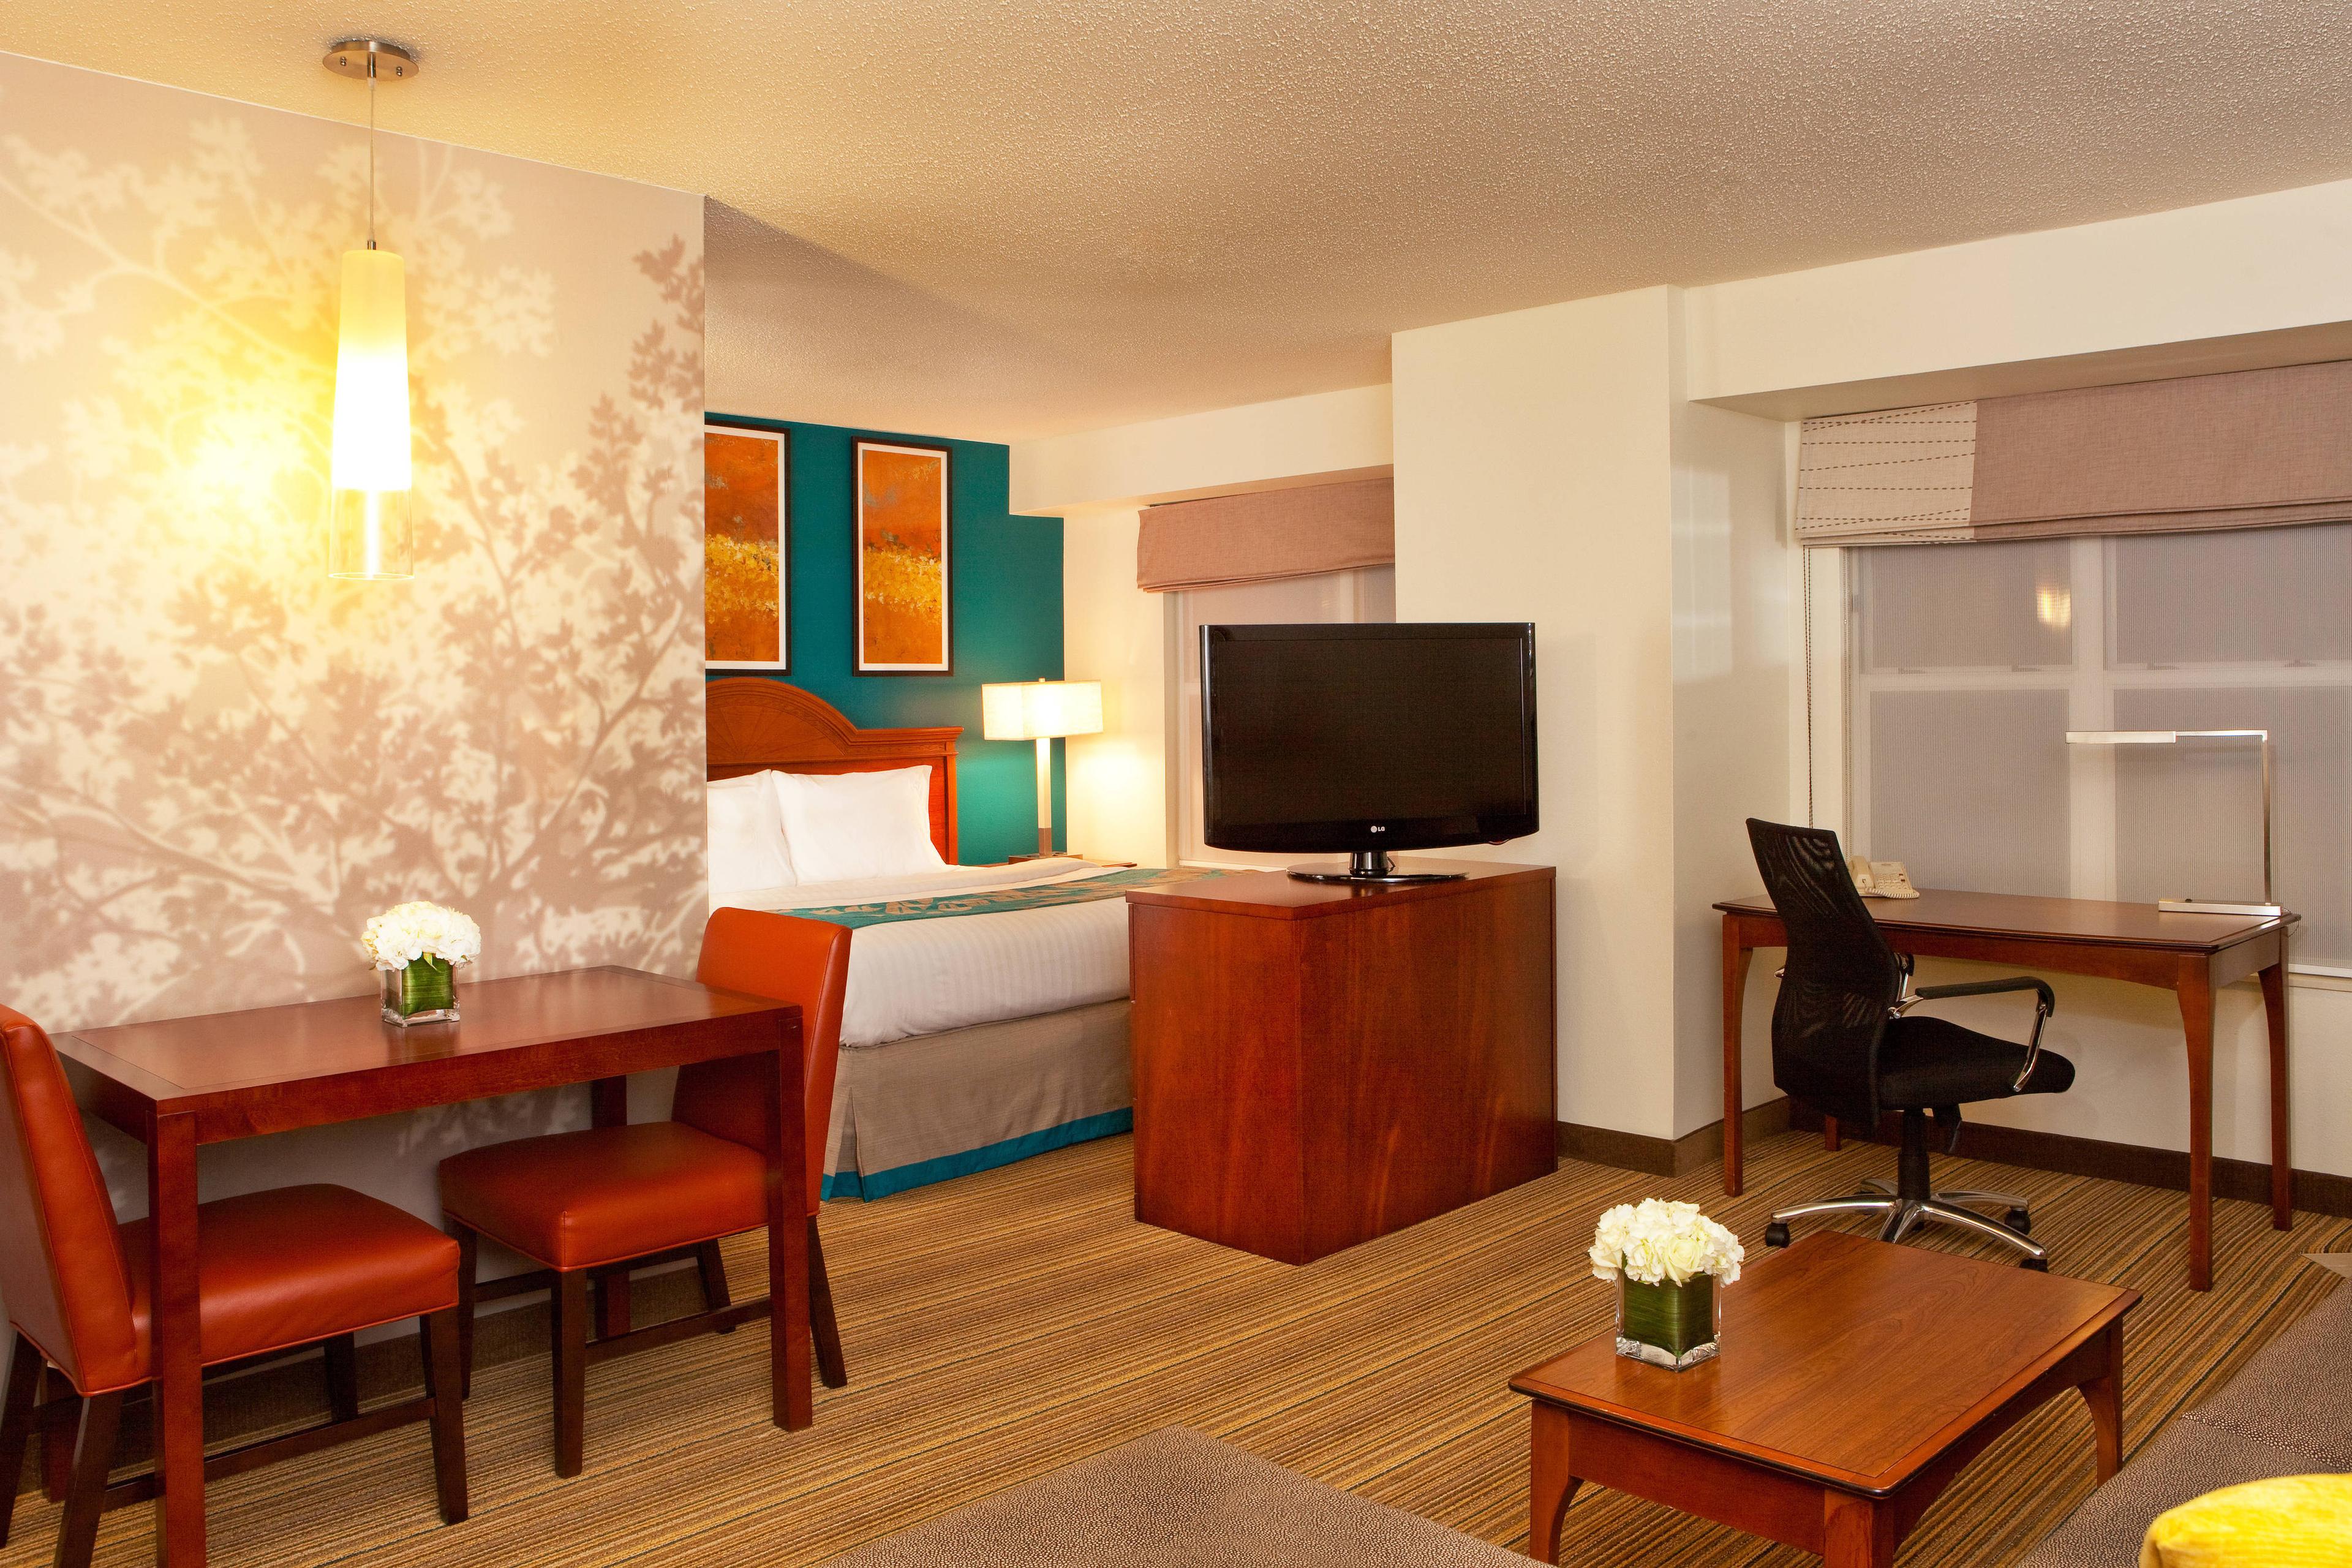 Our Studio Suites feature a spacious living area and dining area, perfect for extended stays in College Park, Maryland.